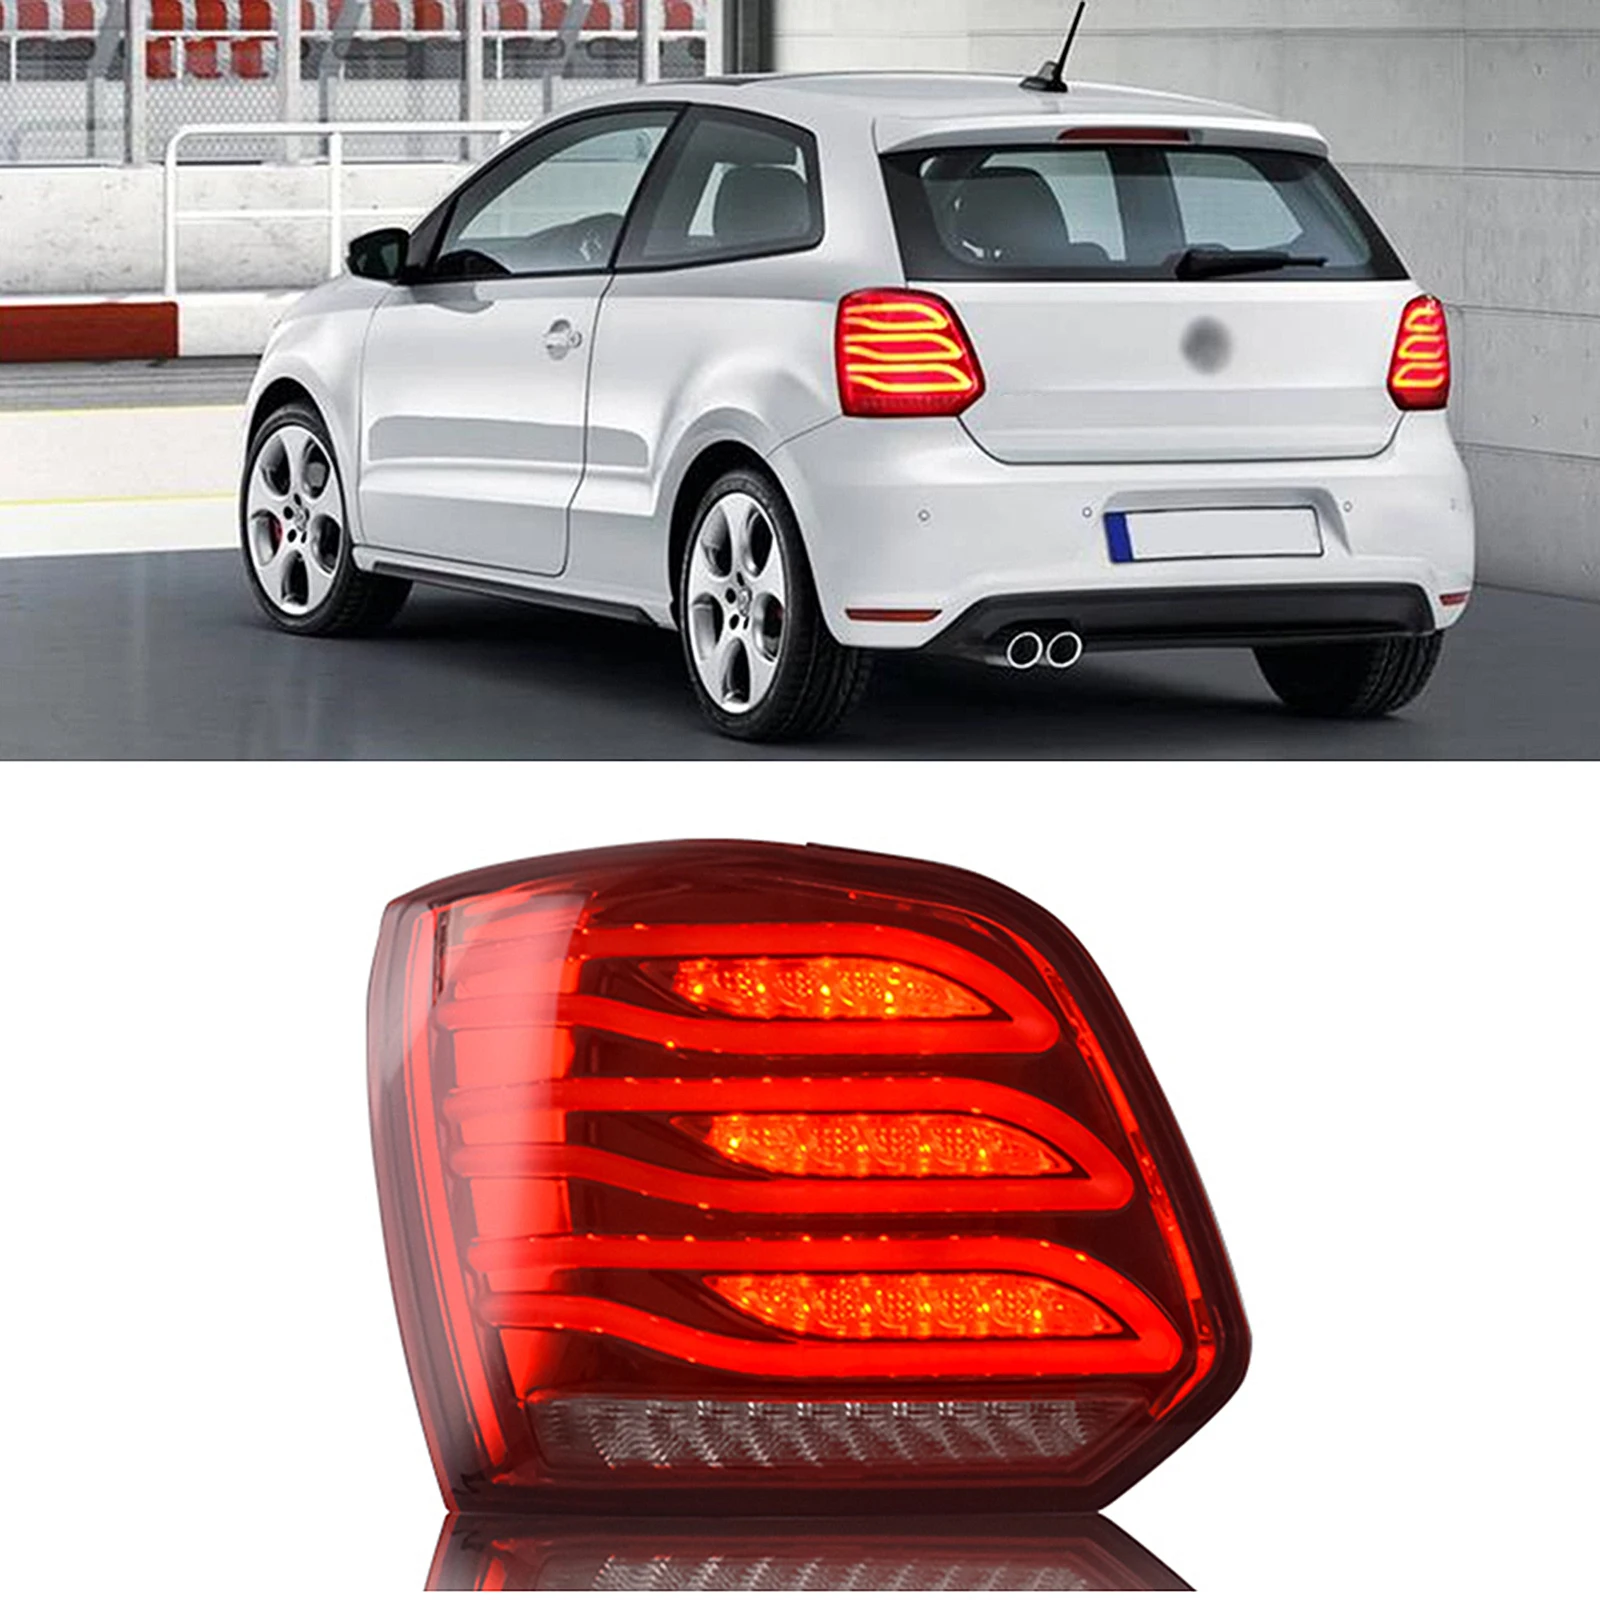 

LED Rear Dynamic Turn Signal Light Side Boot Taillamp Bulb For Volkswagen VW Polo 2011 2012 2013 2014 2015 2016 2017